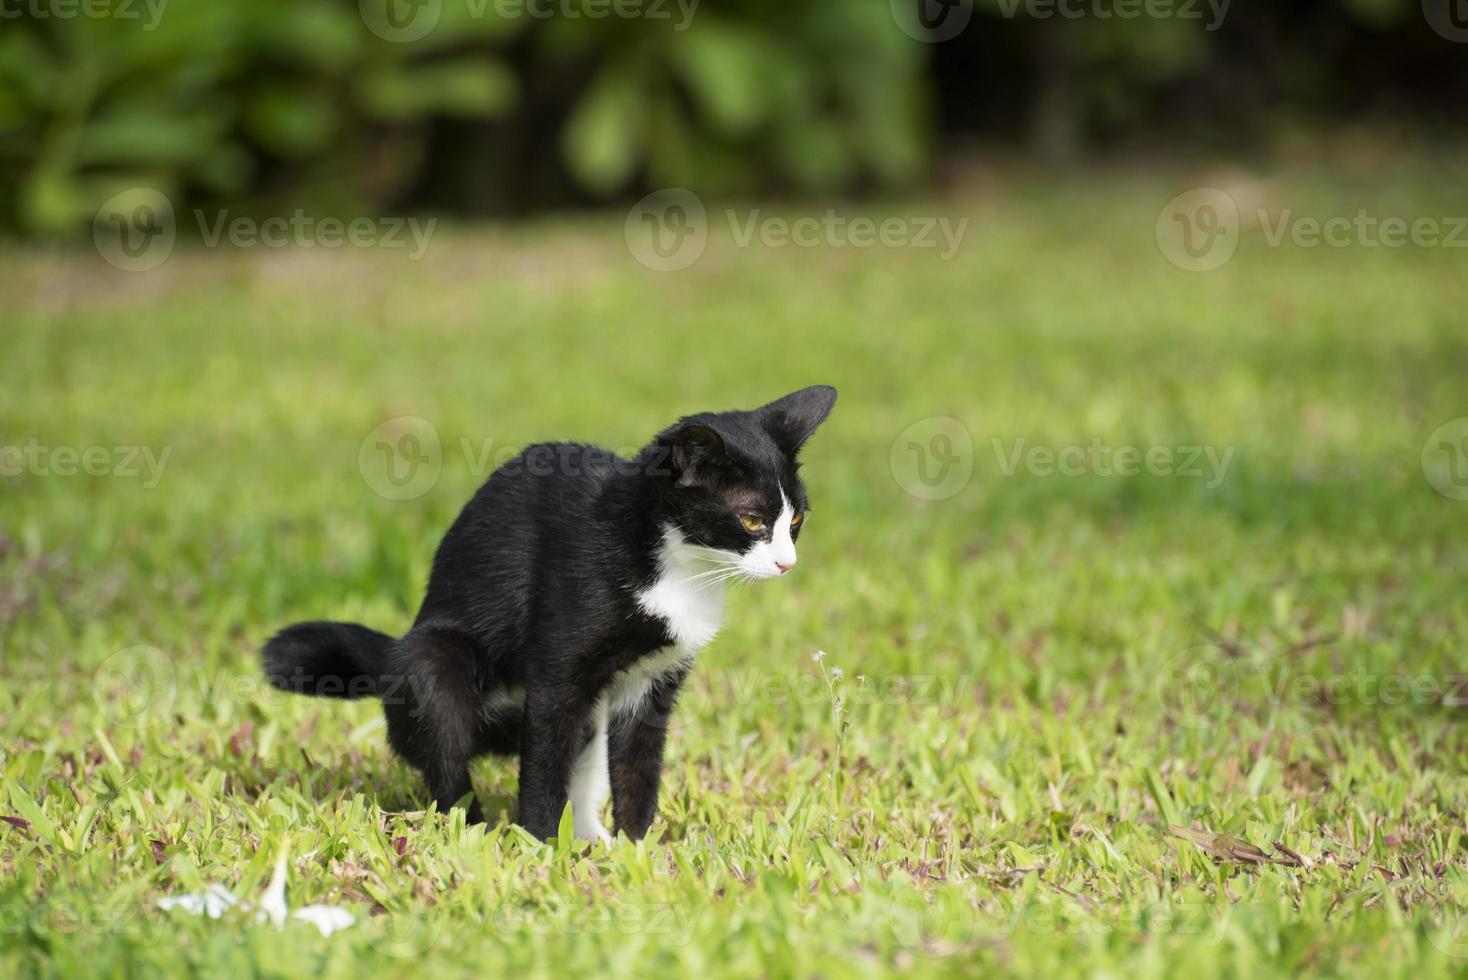 A black and white cat sitting and urinate on a grass photo